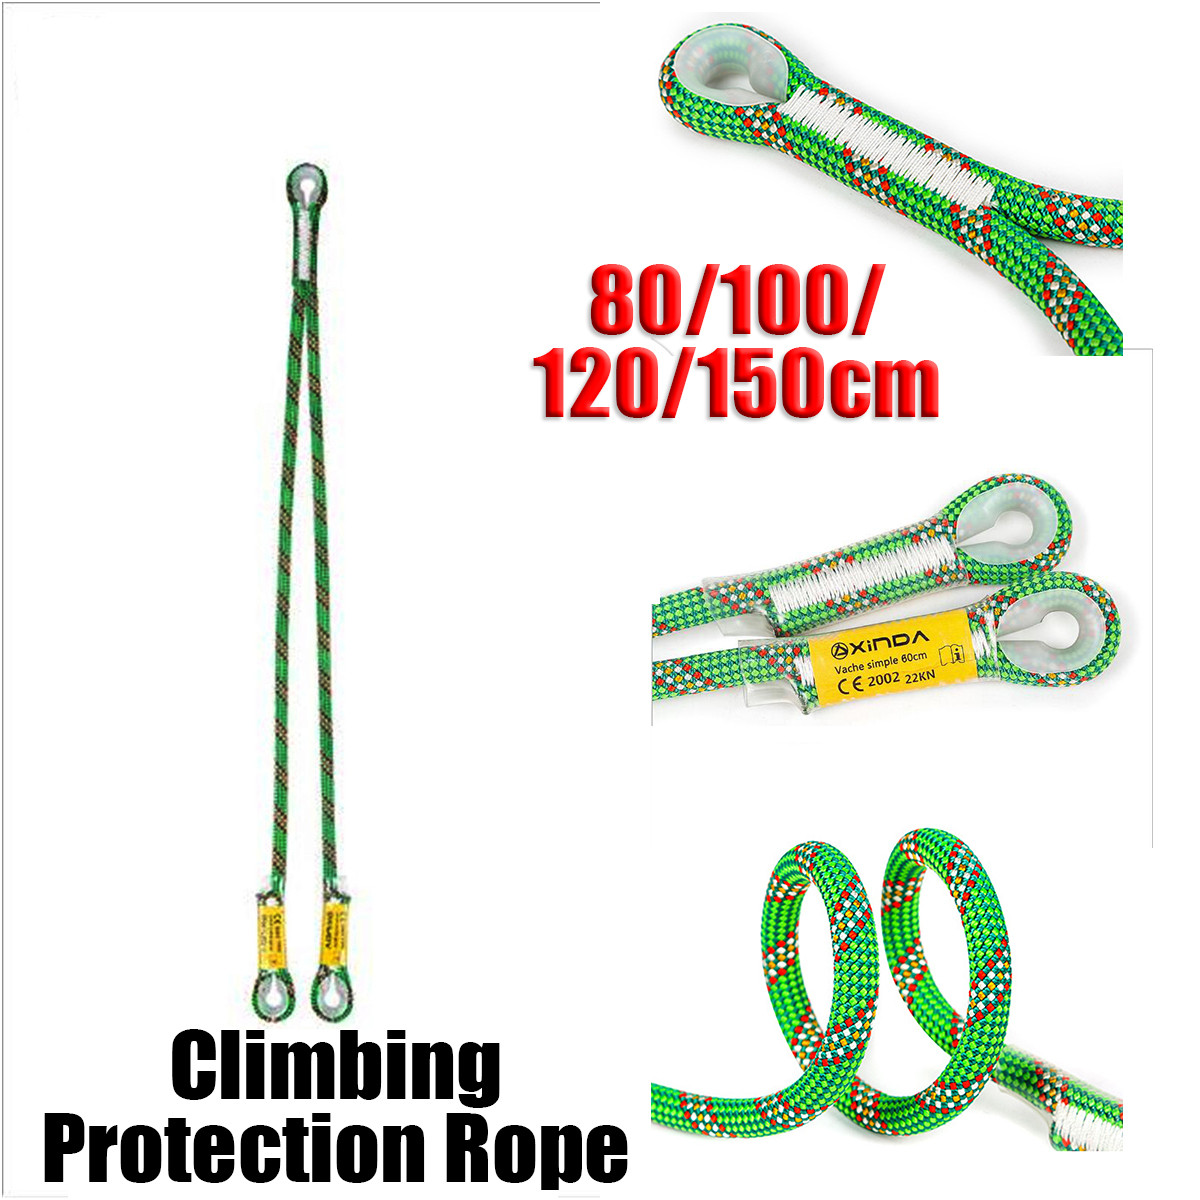 Xinda-105mm-80100120150cm-Professional-Rock-Climbing-Rope-Supplies-High-Altitude-Anti-Fall-Off-Prote-1570418-1